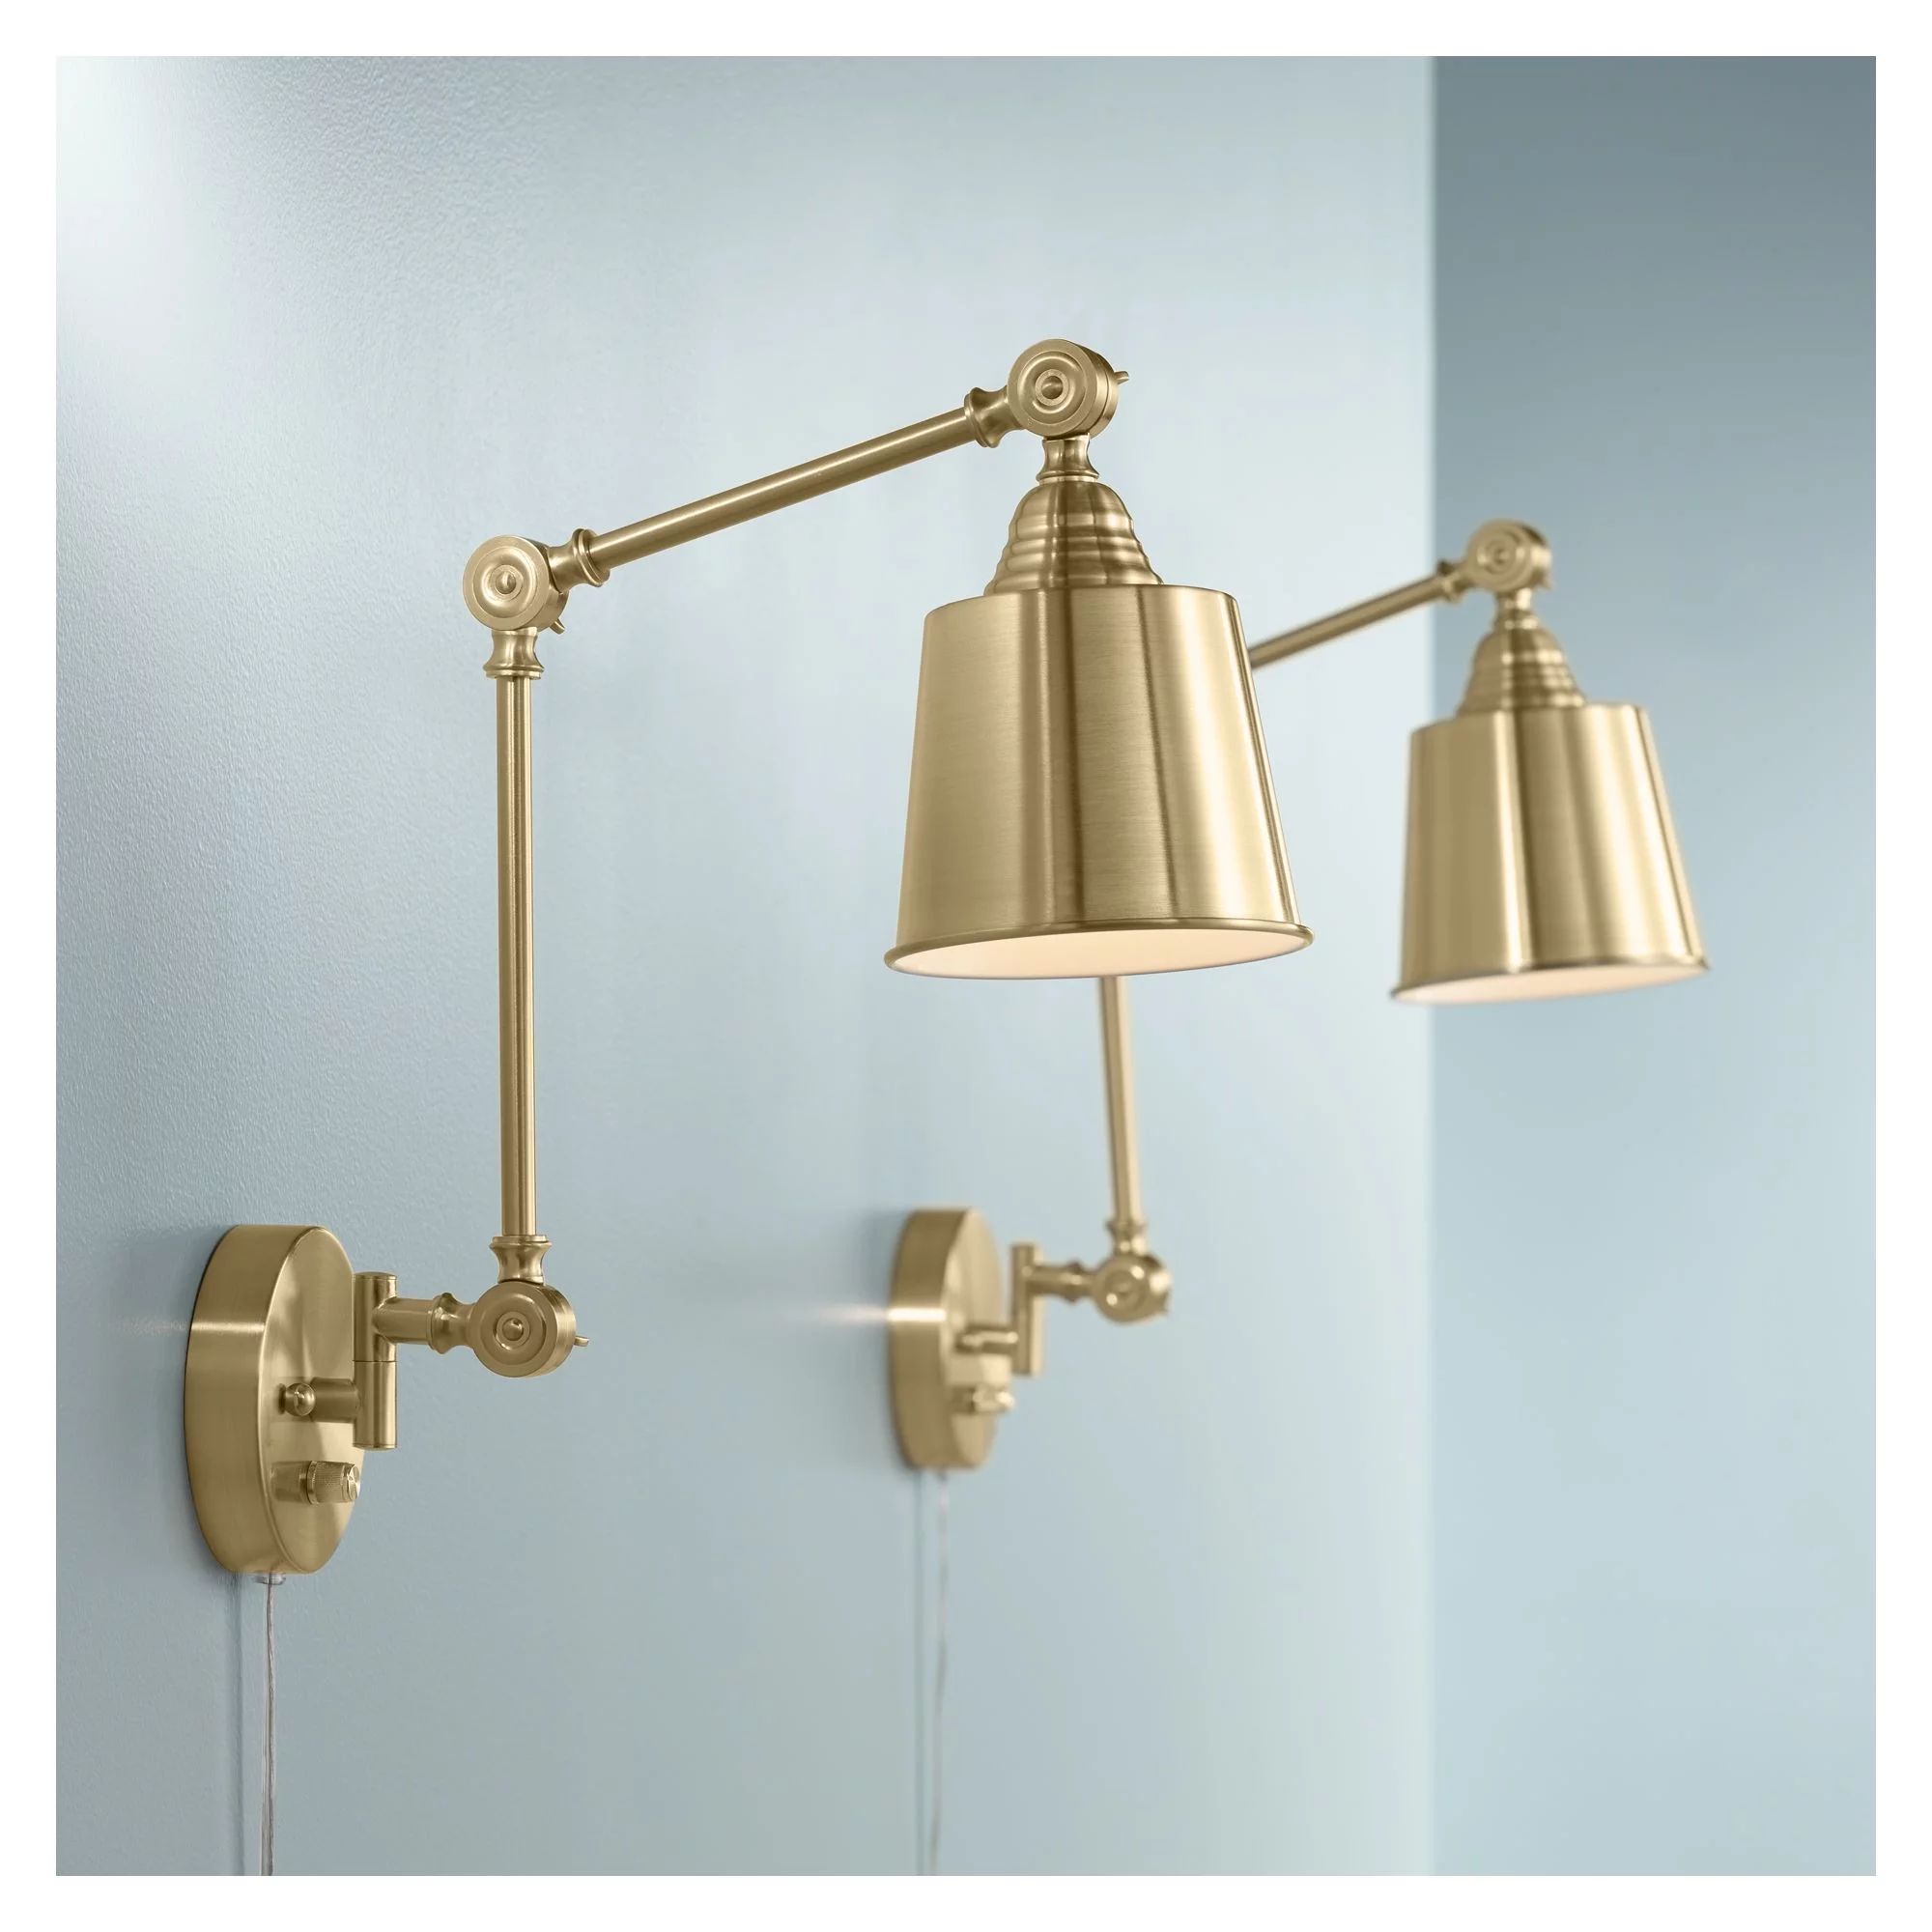 360 Lighting Set of 2 Mendes Antique Brass Down-Light Plug-In Wall Lamps | Walmart (US)